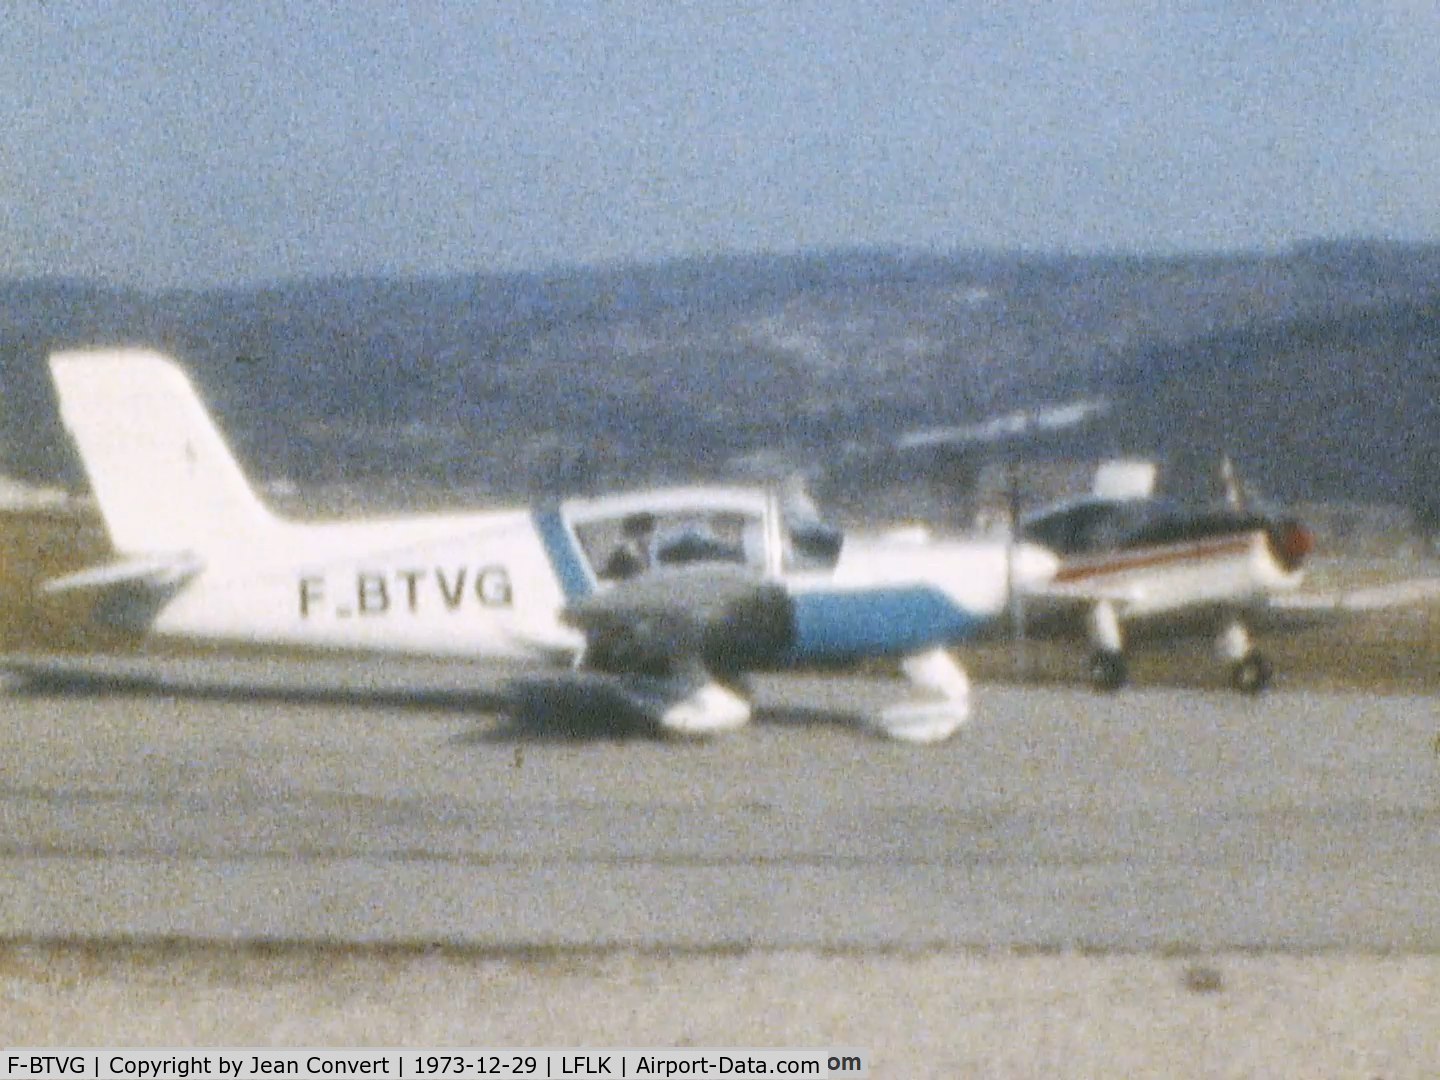 F-BTVG, Socata MS-893E Rallye 180GT C/N 12124, Private aircraft hangared at Oyonnax, France, at this time. Photo extracted from Super-8 mm movie done by my father.